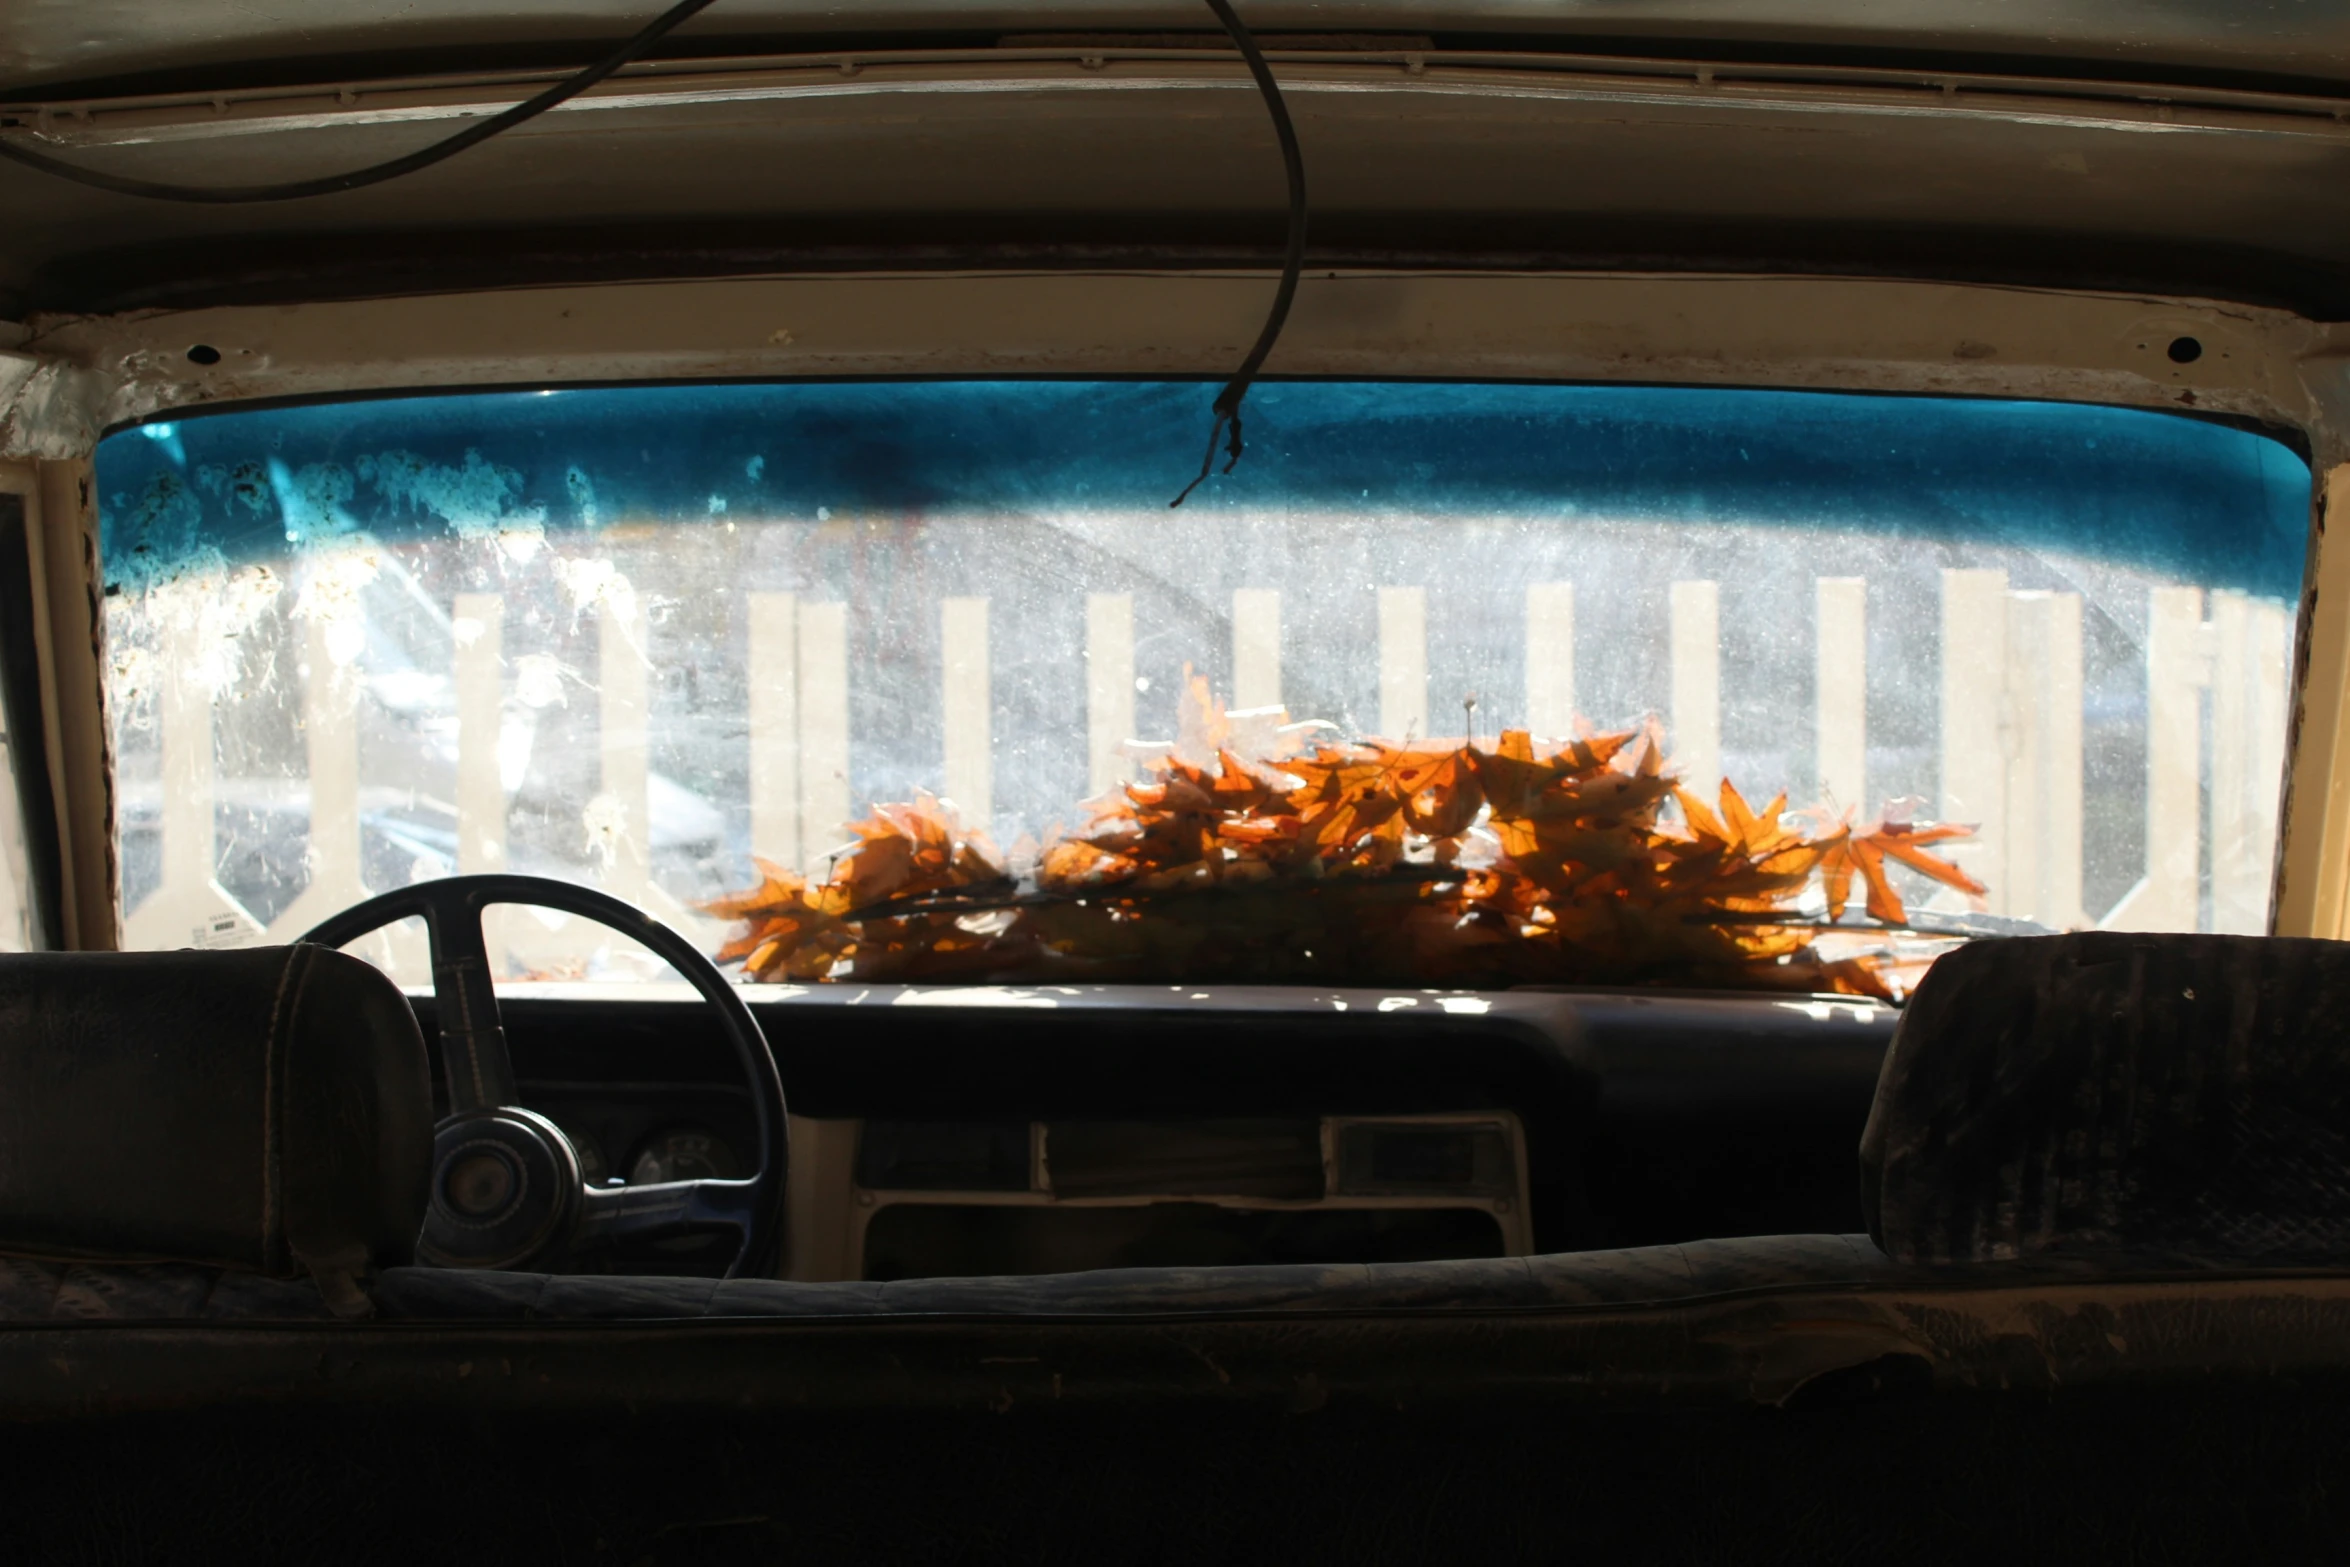 the view from inside of an old truck shows a tree and orange flowers